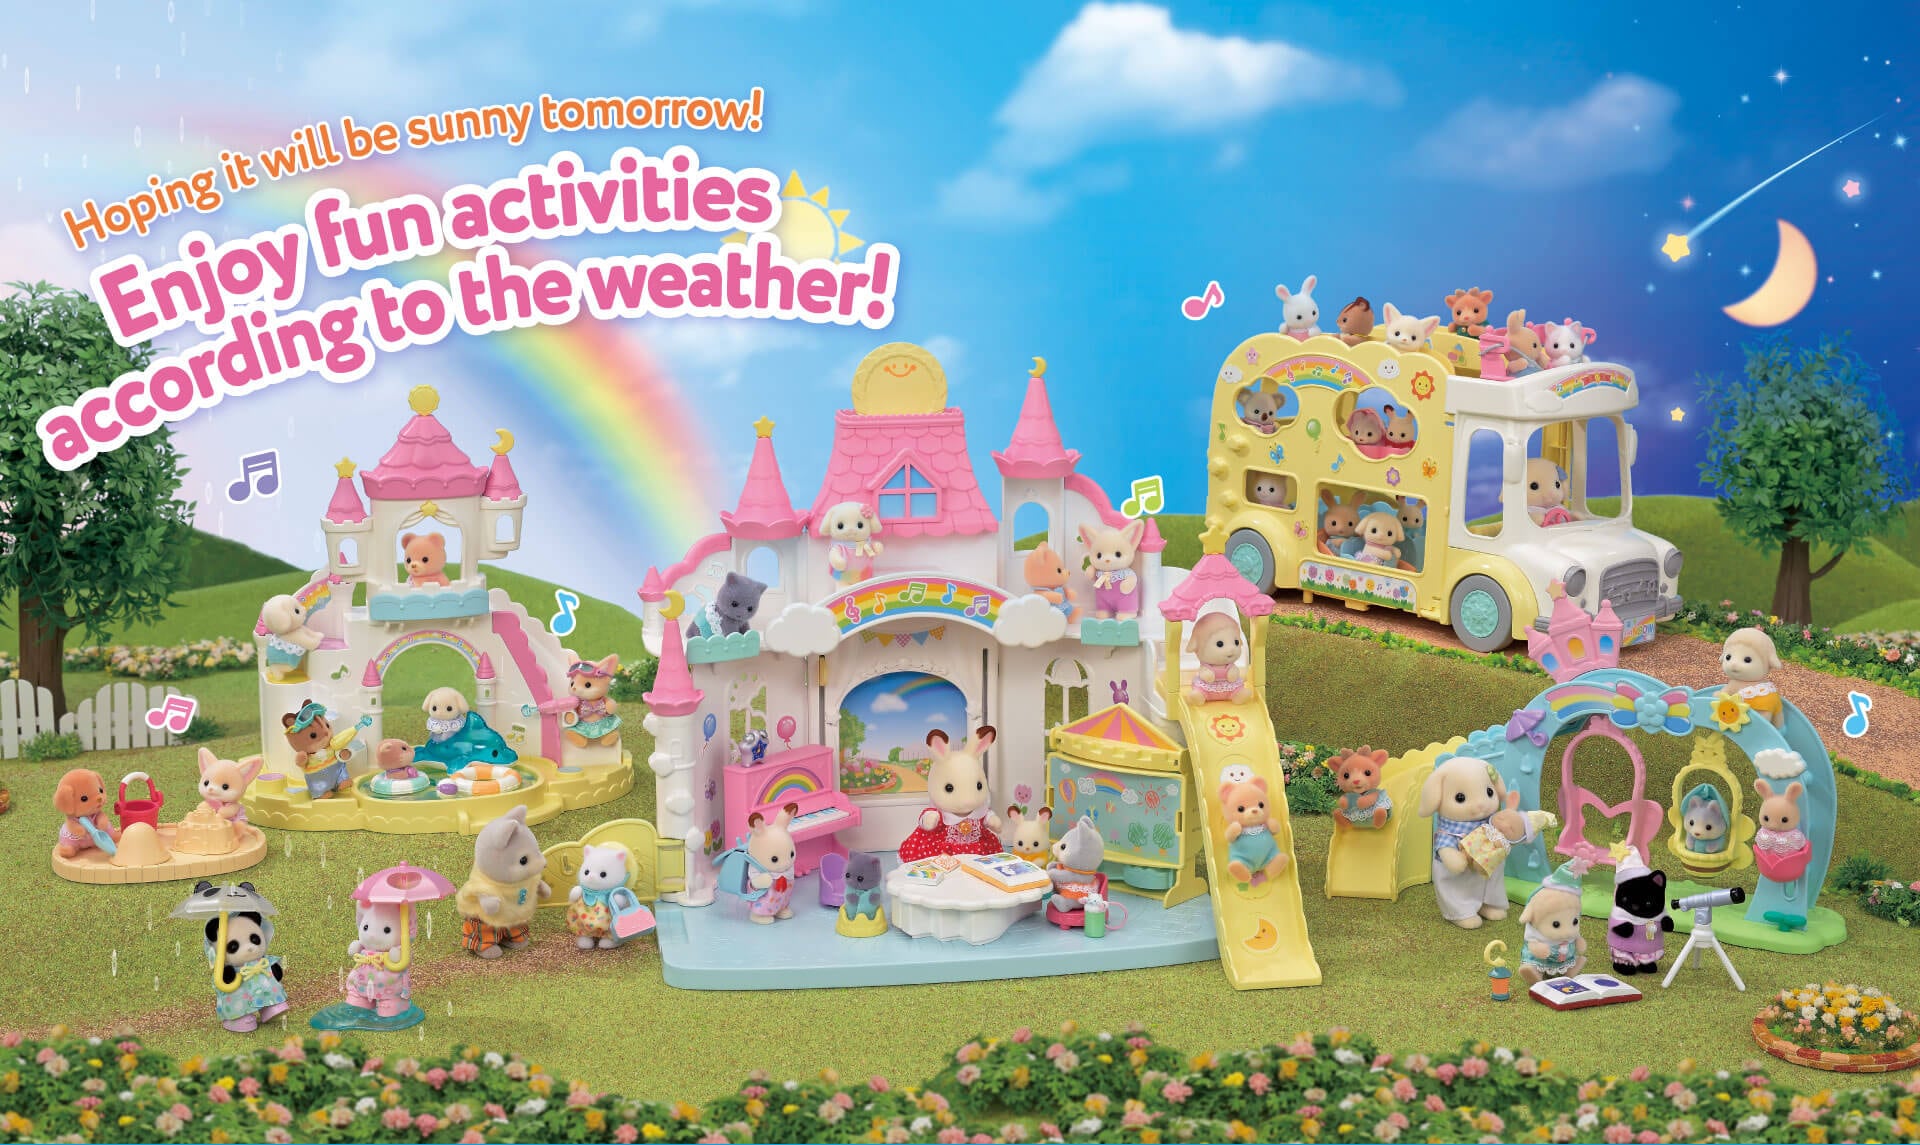 The Sunny Castle Nursery of The Sylvanian Families' Nursery Series. Let's enjoy fun activities according to the weather!